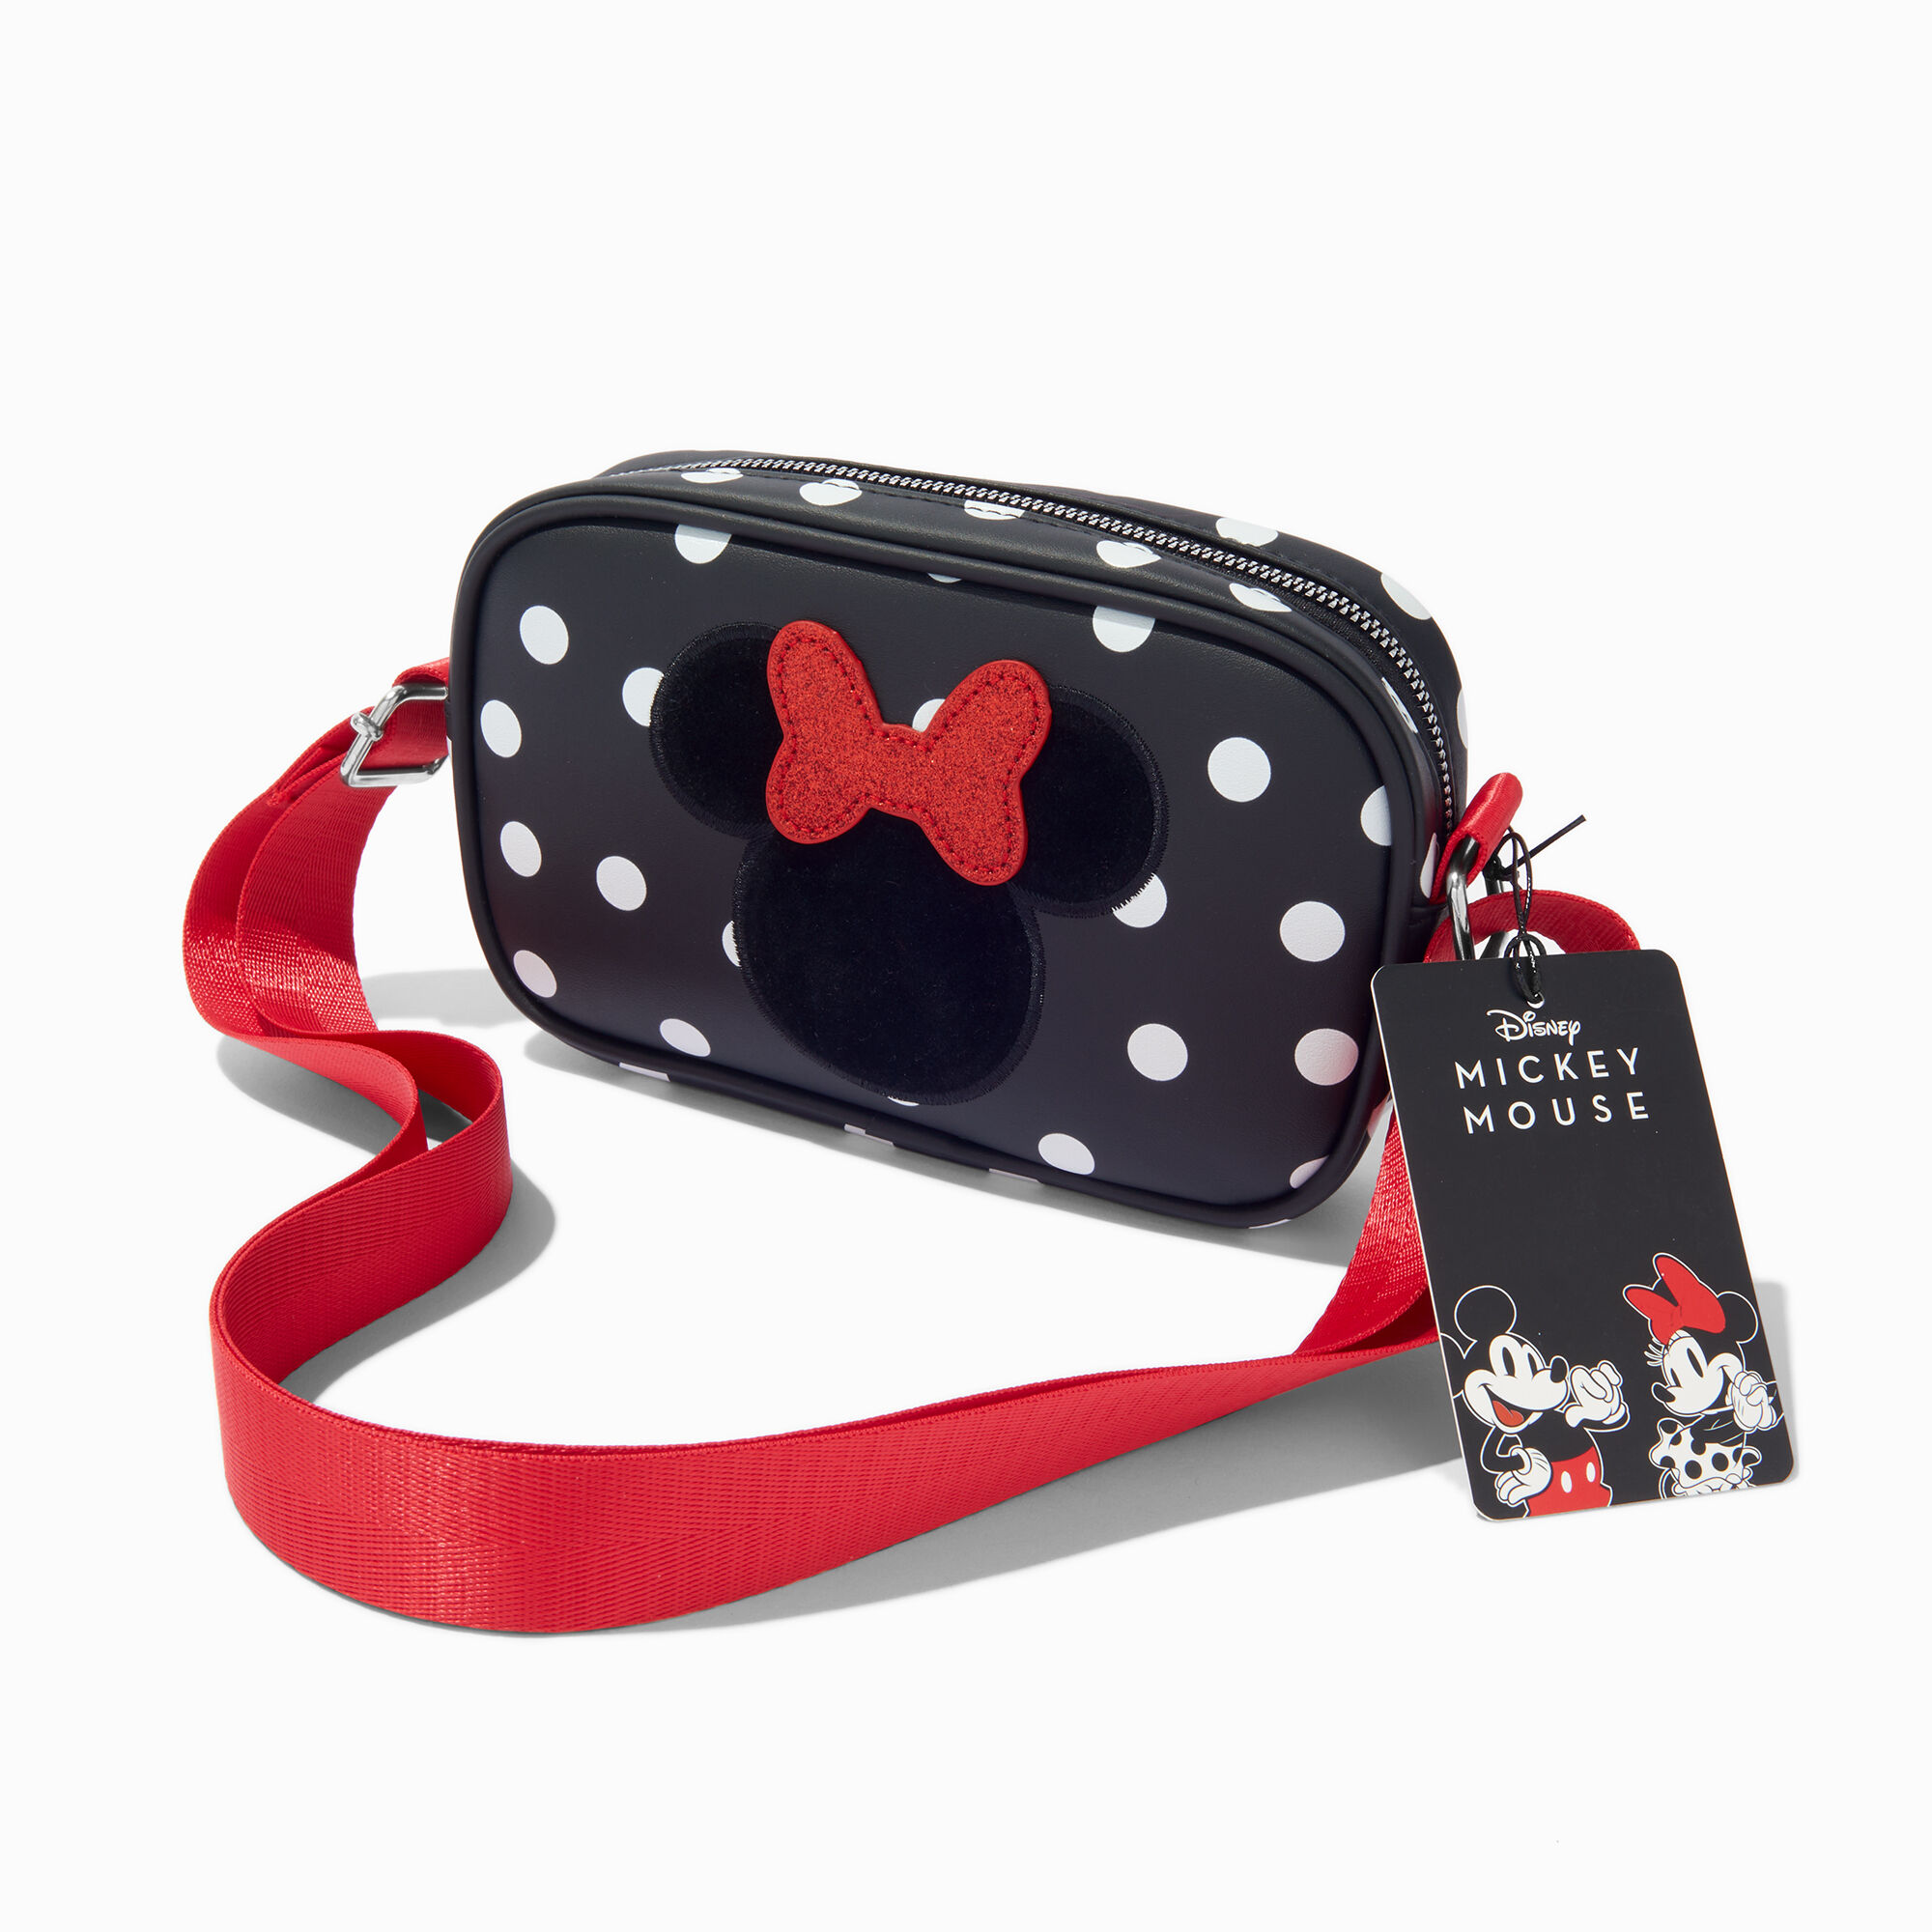 View Claires Disney 100 Minnie Mouse Polka Dot Crossbody Bag information